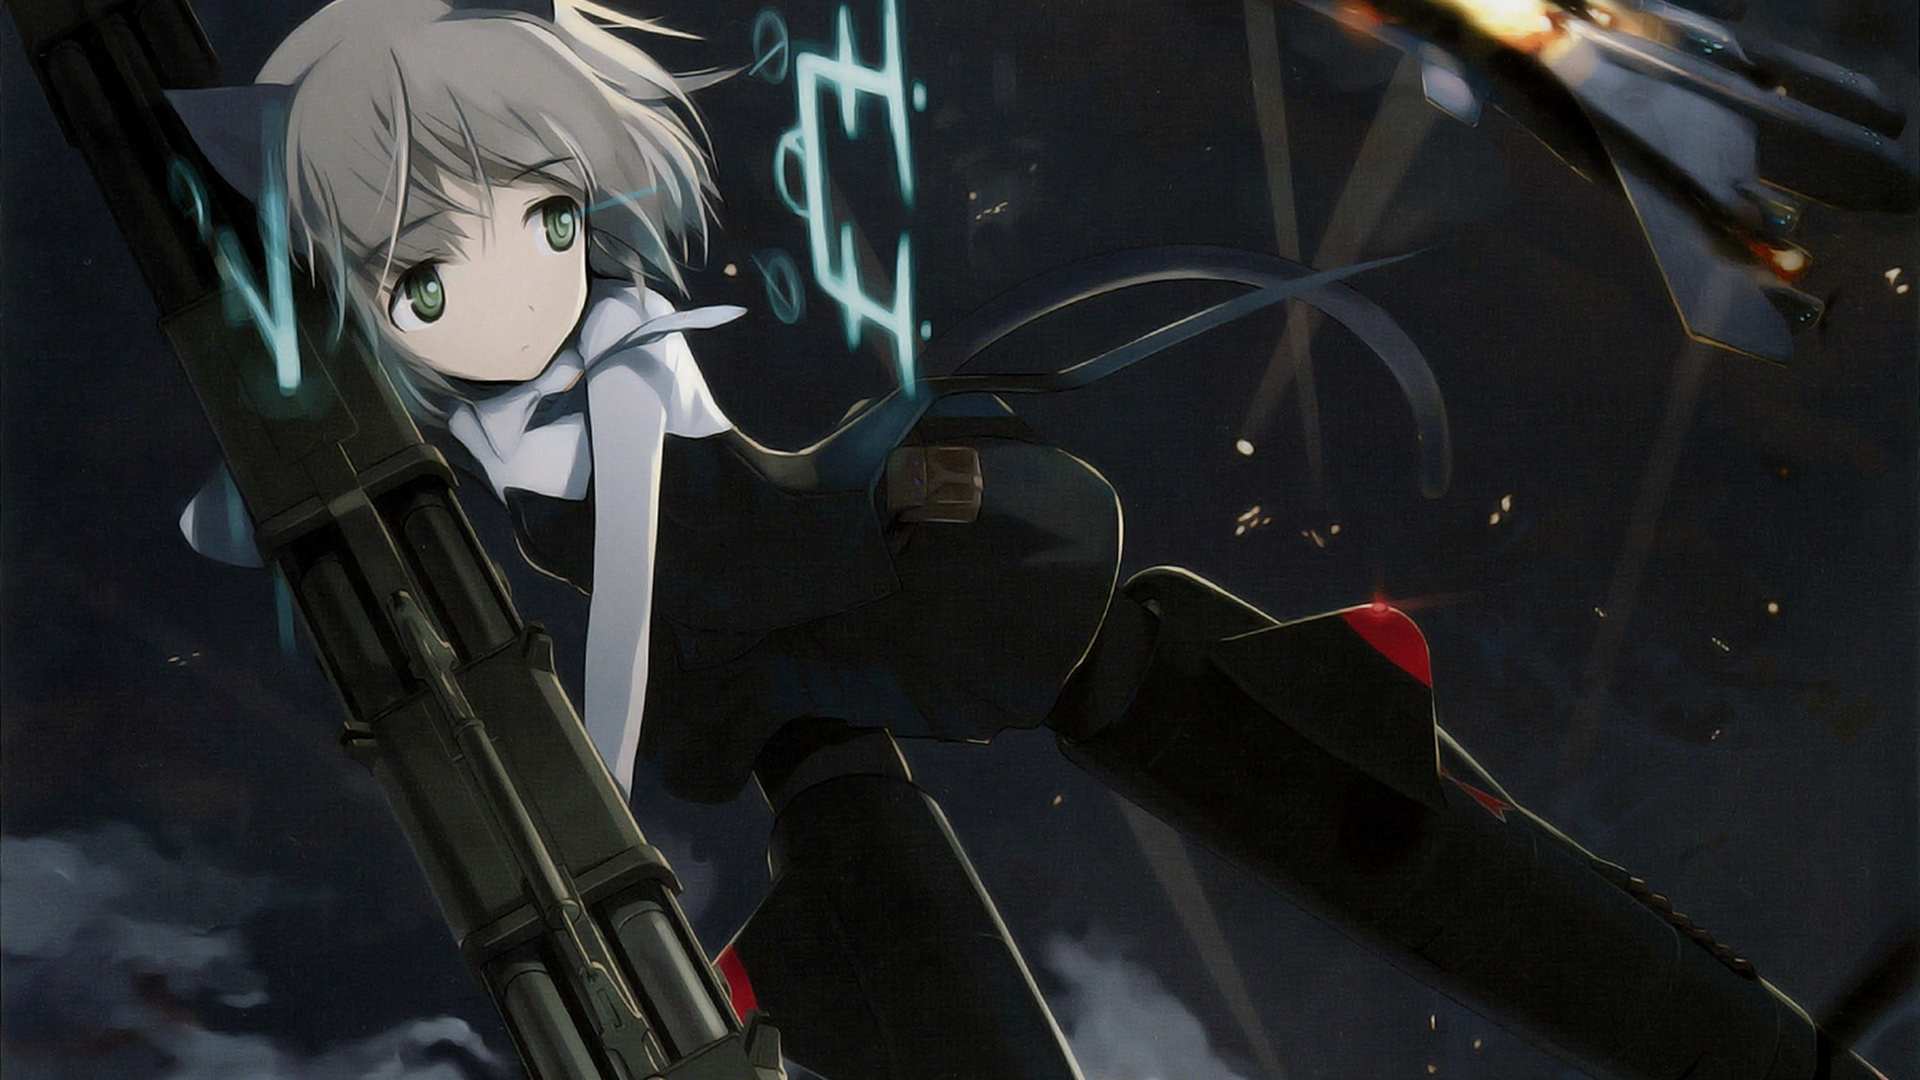 White Haired Male Anime Character Holding Black Rifle. Wallpaper in 1920x1080 Resolution